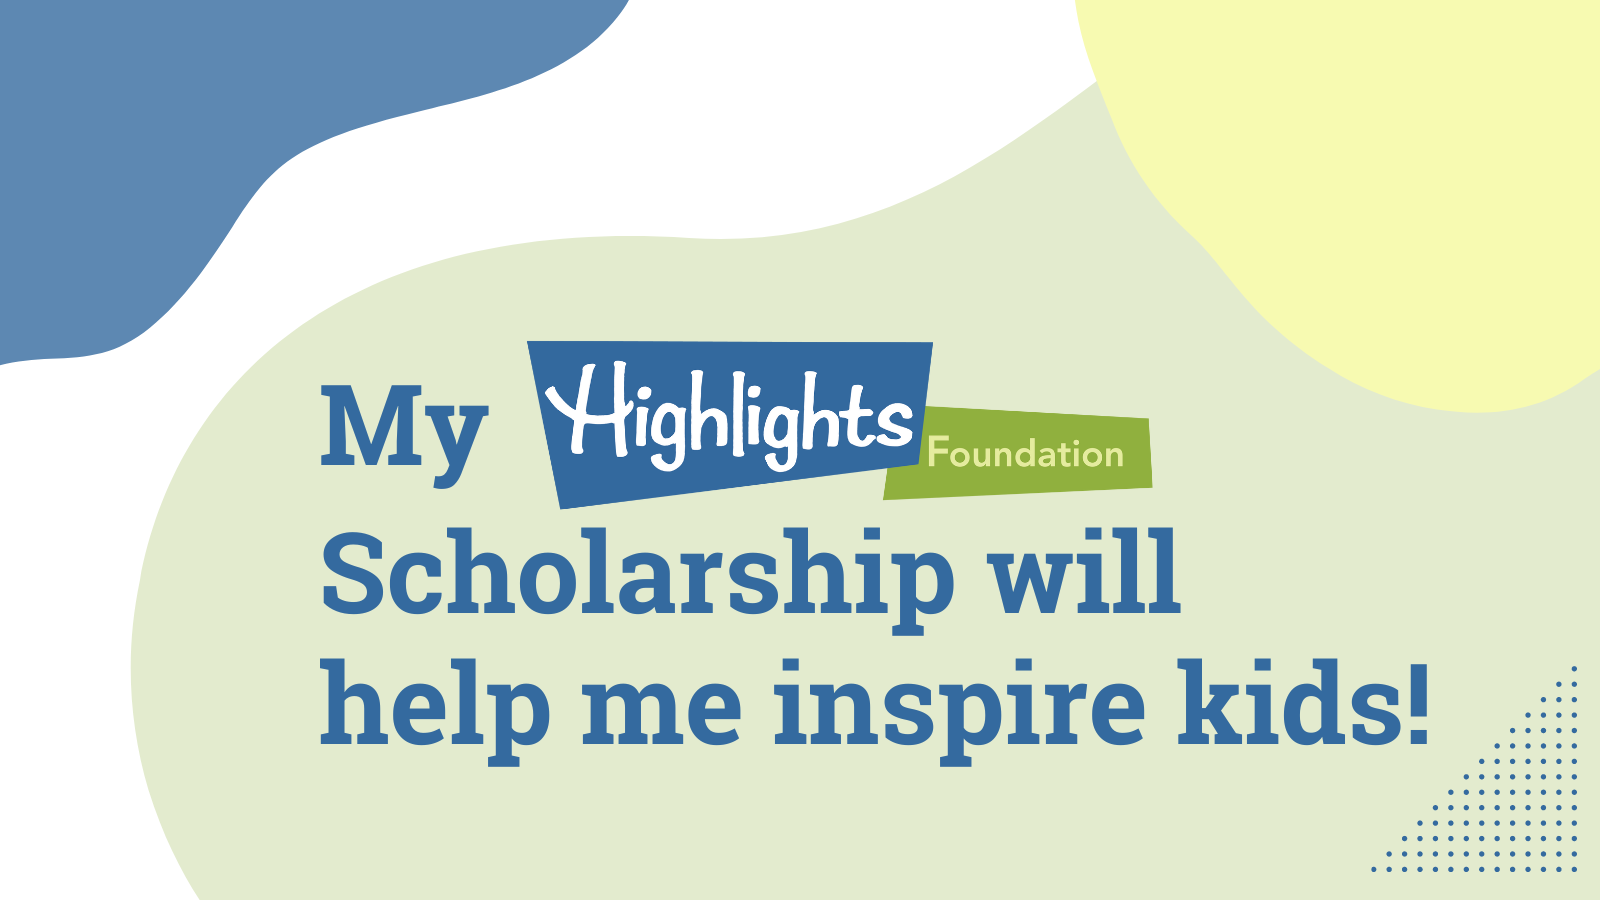 My Highlights Foundation Scholarship will help me inspire kids! (Twitter size)